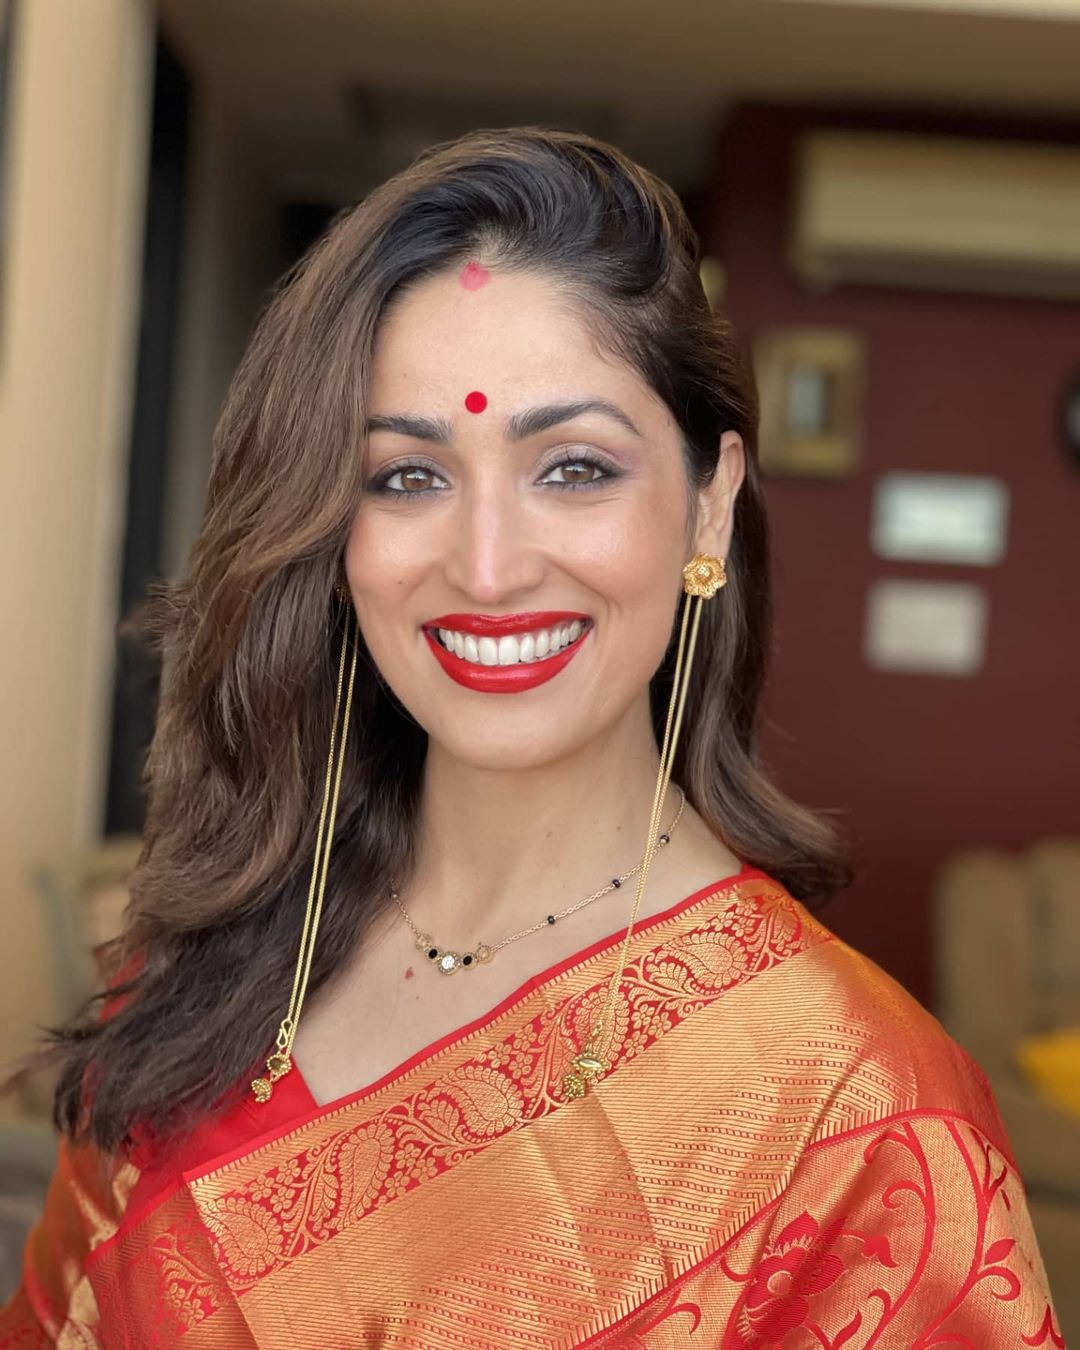 Yami Gautam looked breathtaking in a red and golden saree, complete with red lipstick and a matching bindi